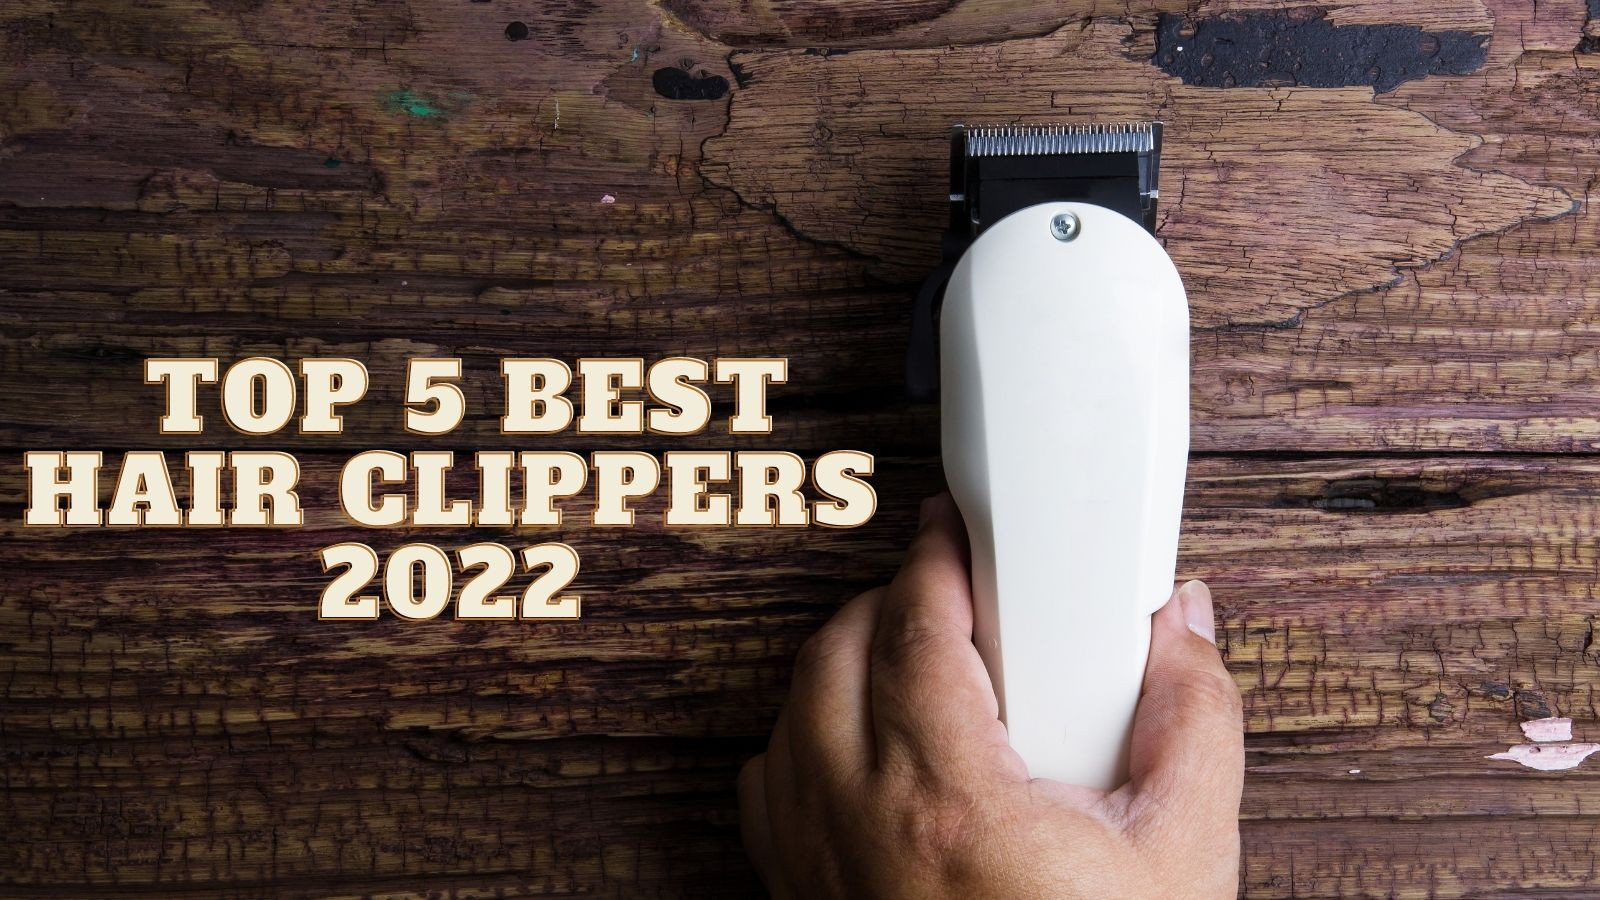 Top 5 best hair clippers 2022